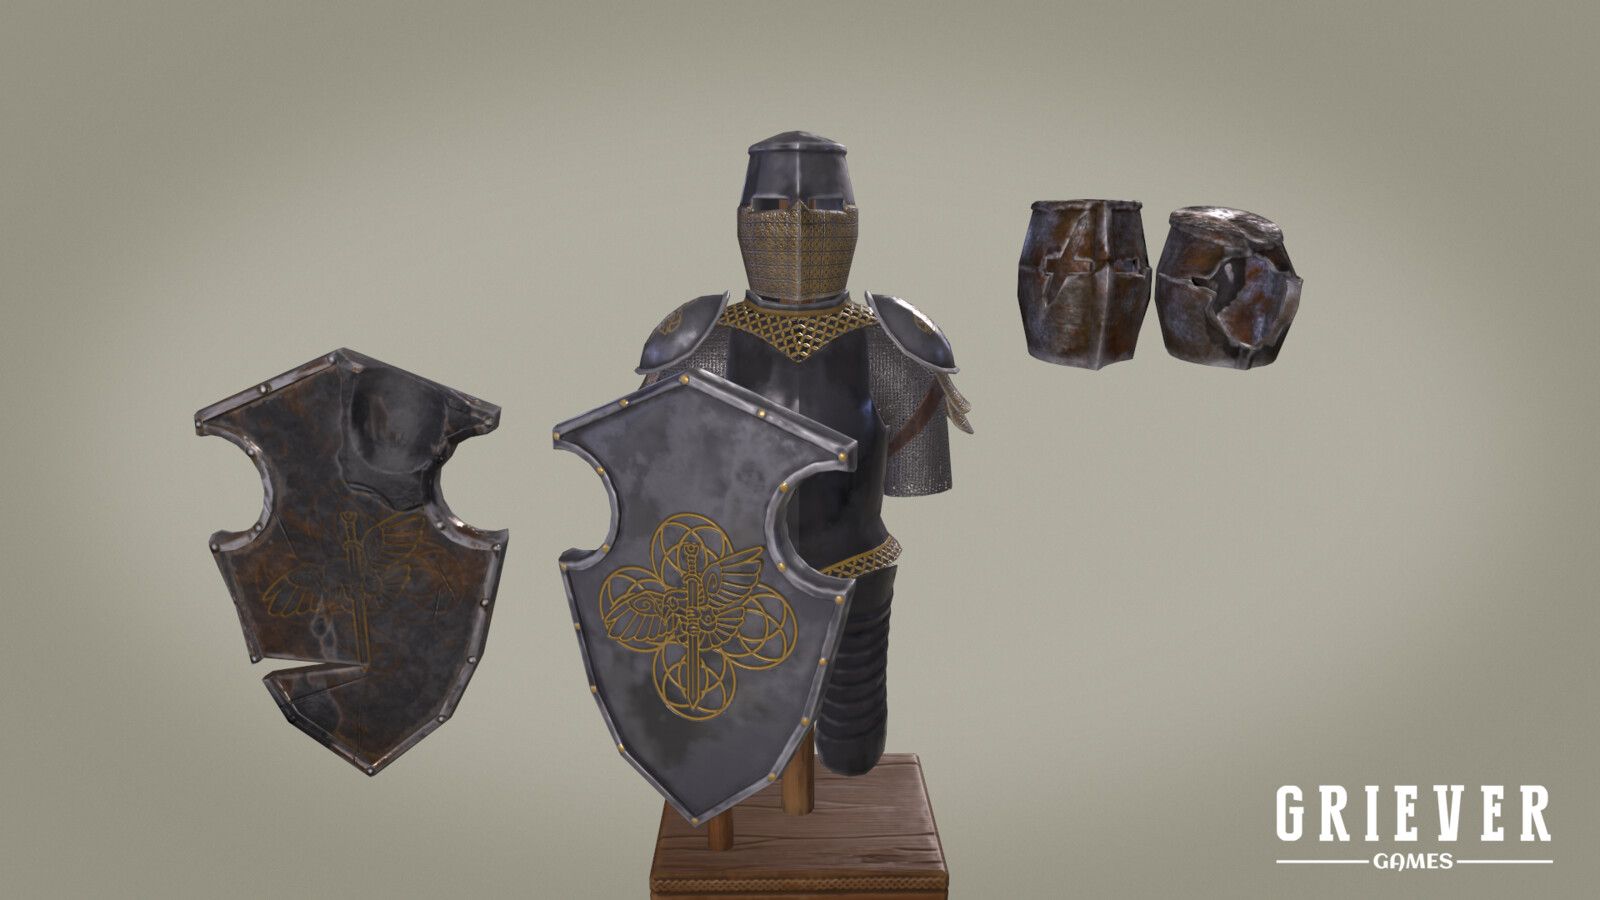 To save time and keep assets cohesive, I used my damaged shield and helmet props to create undamaged versions for this display